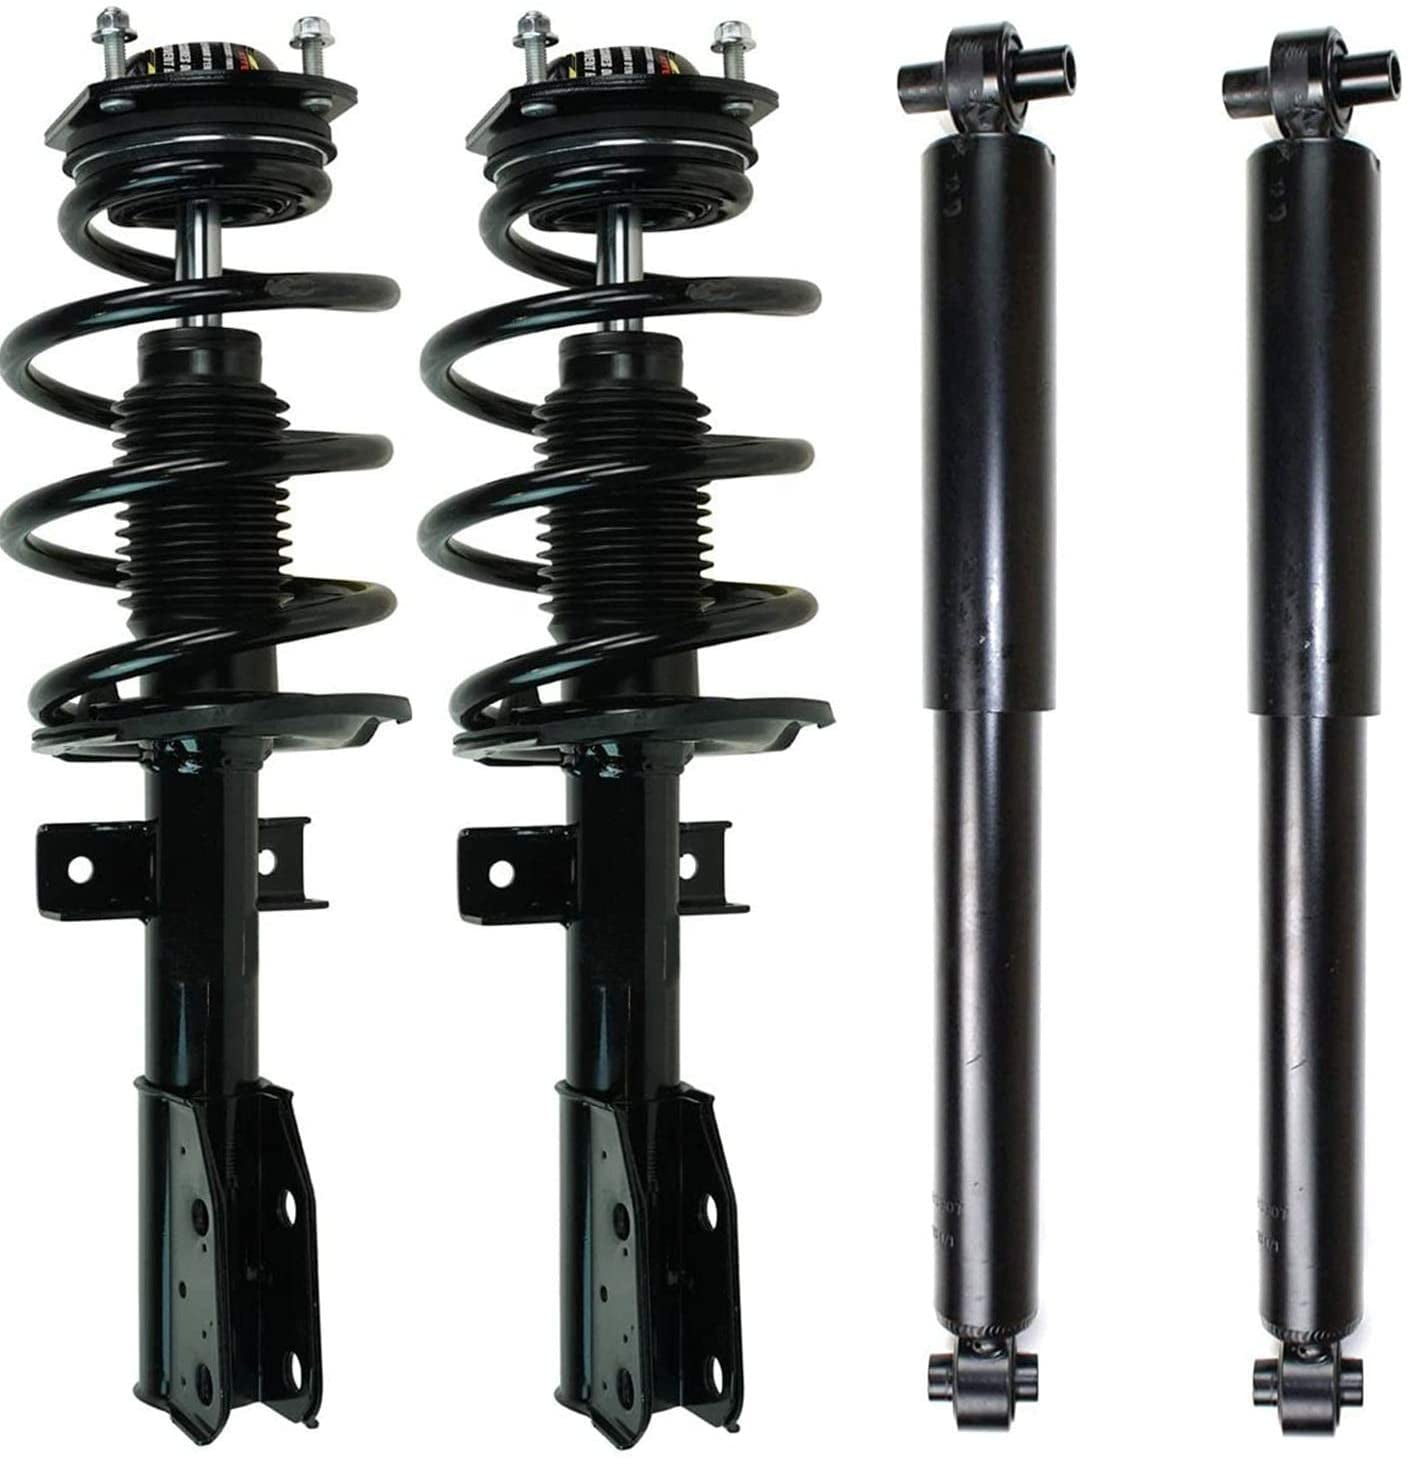 4PC Complete Front Strut & Coil Spring and Rear Absorber Shocks Assembly for 2007 2008 2009 2010 2010 Chevy Traverse Rear Coil Spring Replacement